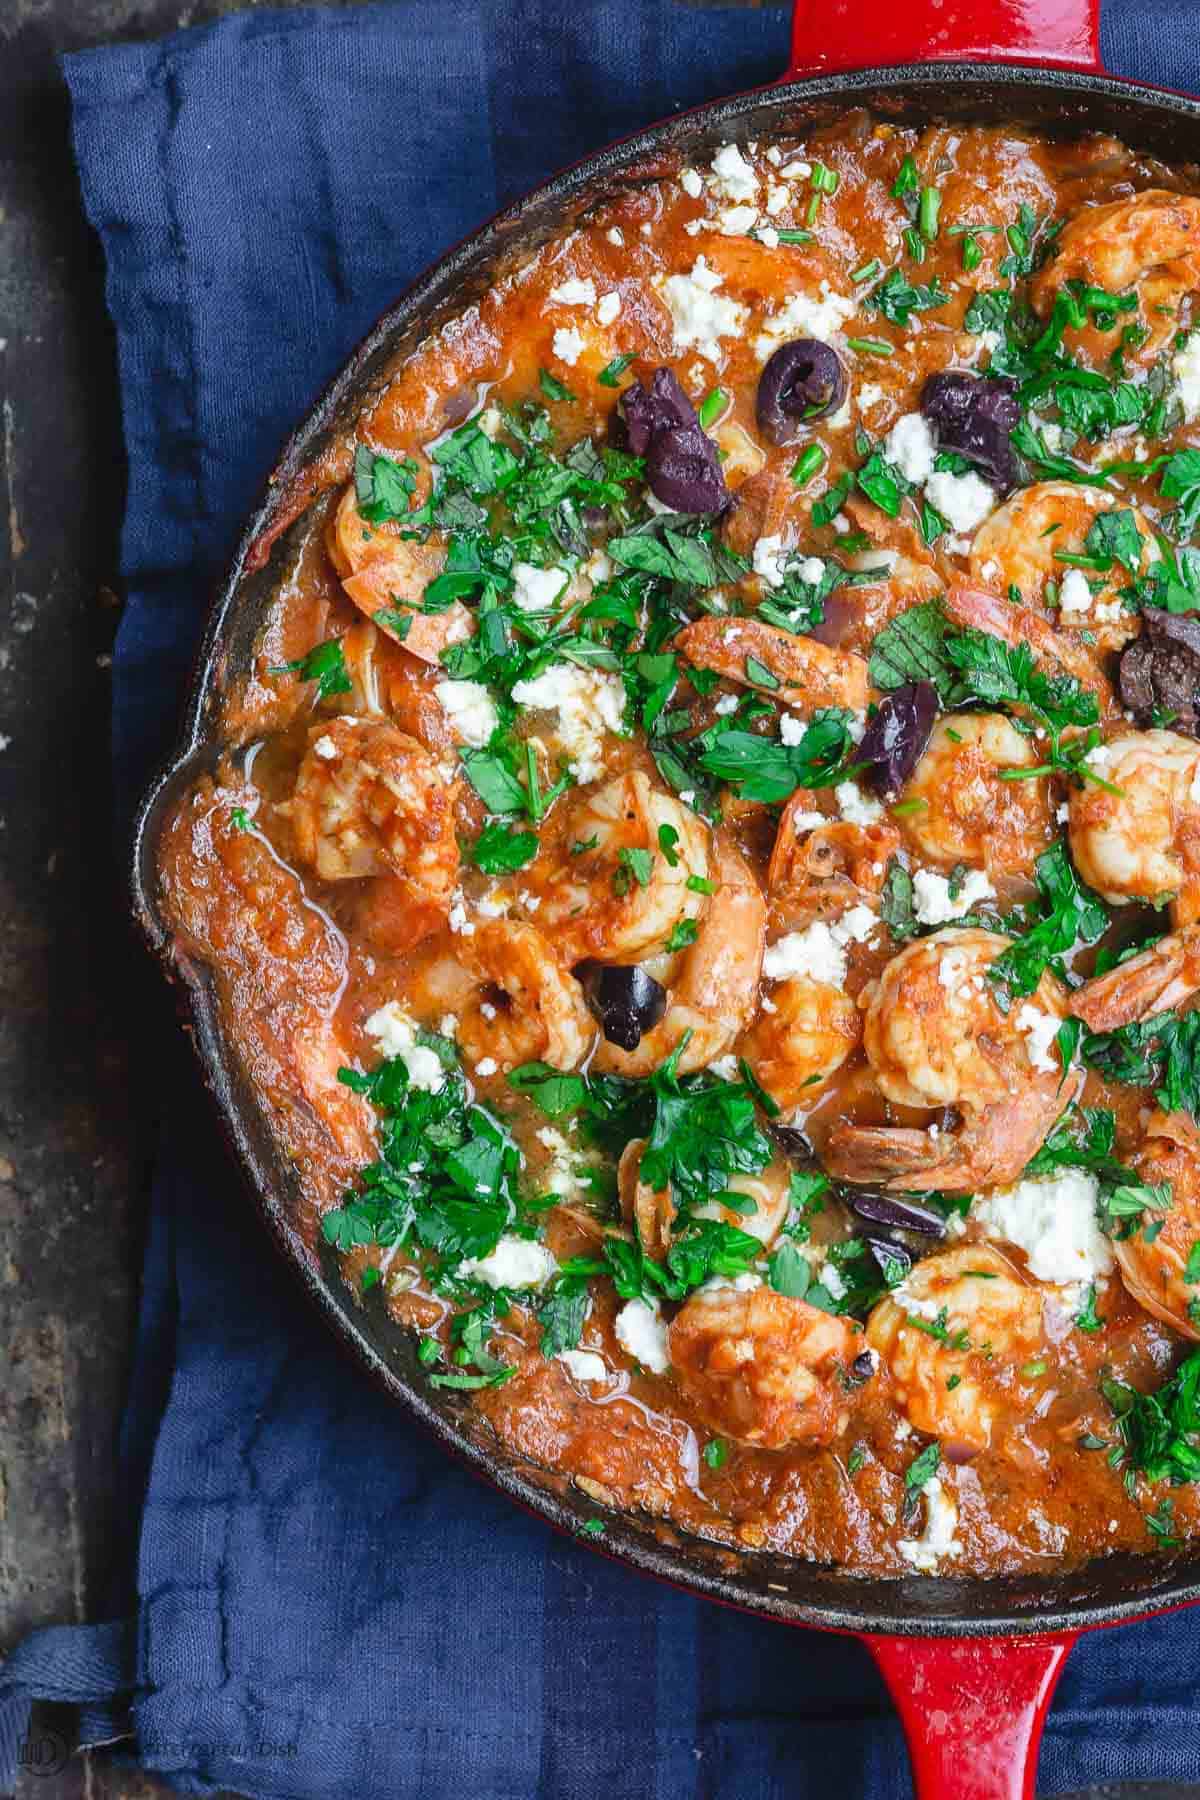 Greek shrimp in skillet, doused in tomato sauce and topped with chopped fresh herbs, crumbled feta cheese, and olives.